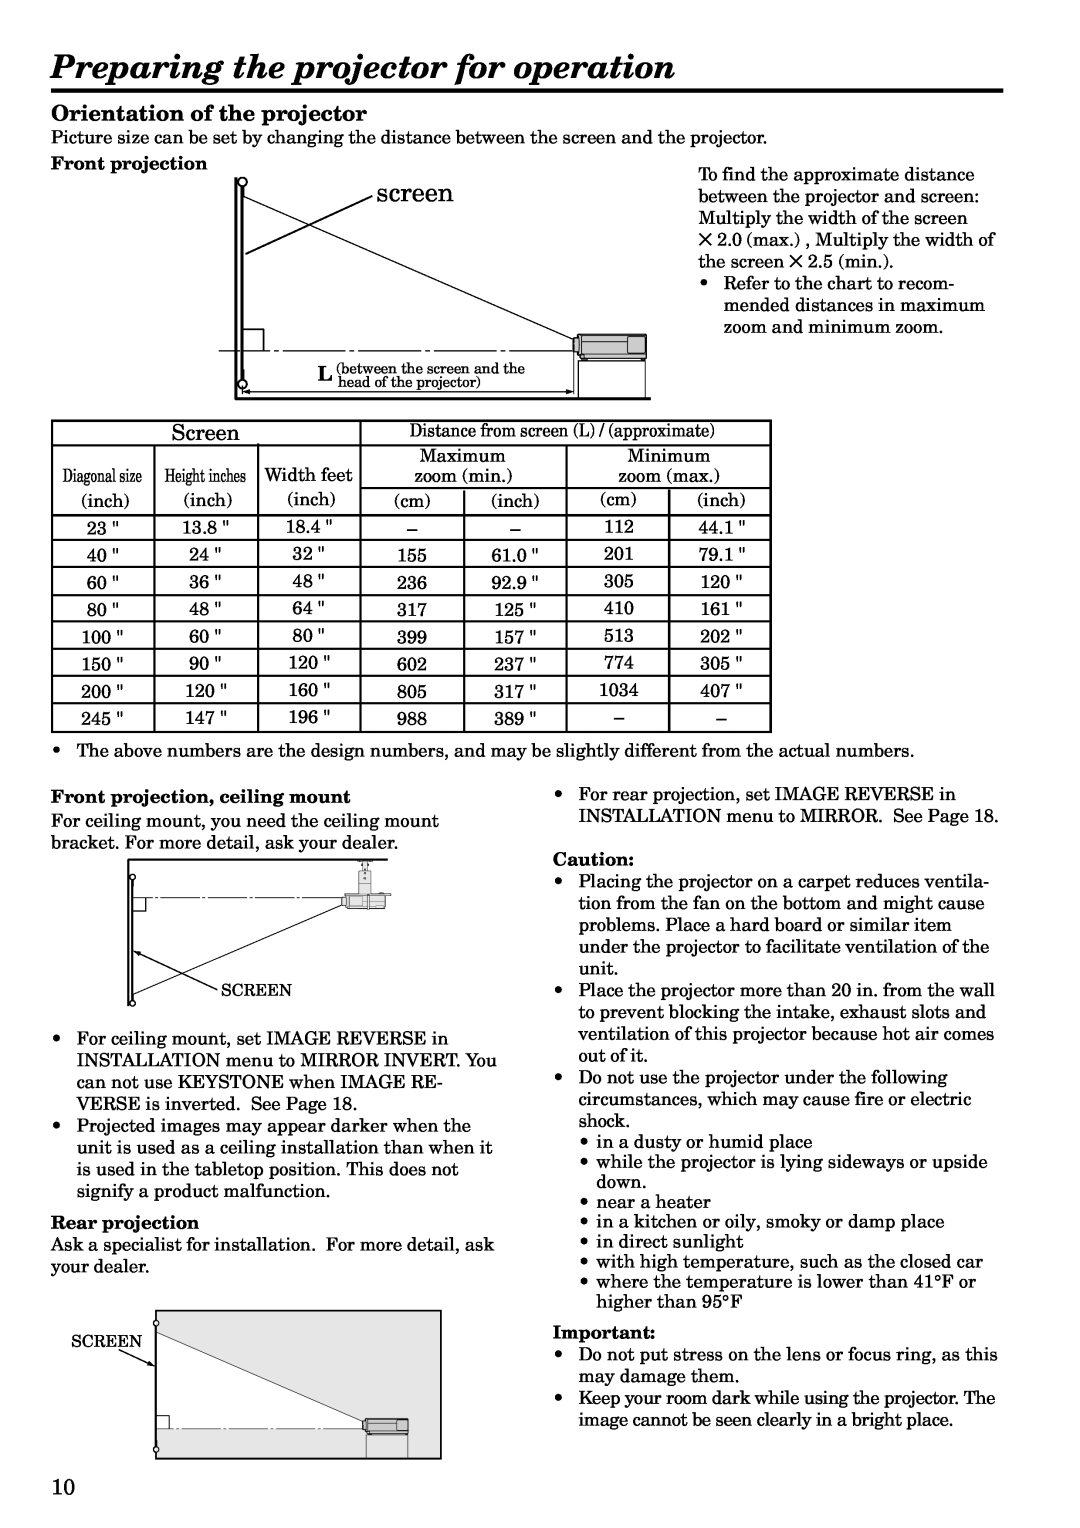 Mitsubishi Electronics LVP-X120A user manual Preparing the projector for operation, screen, Orientation of the projector 